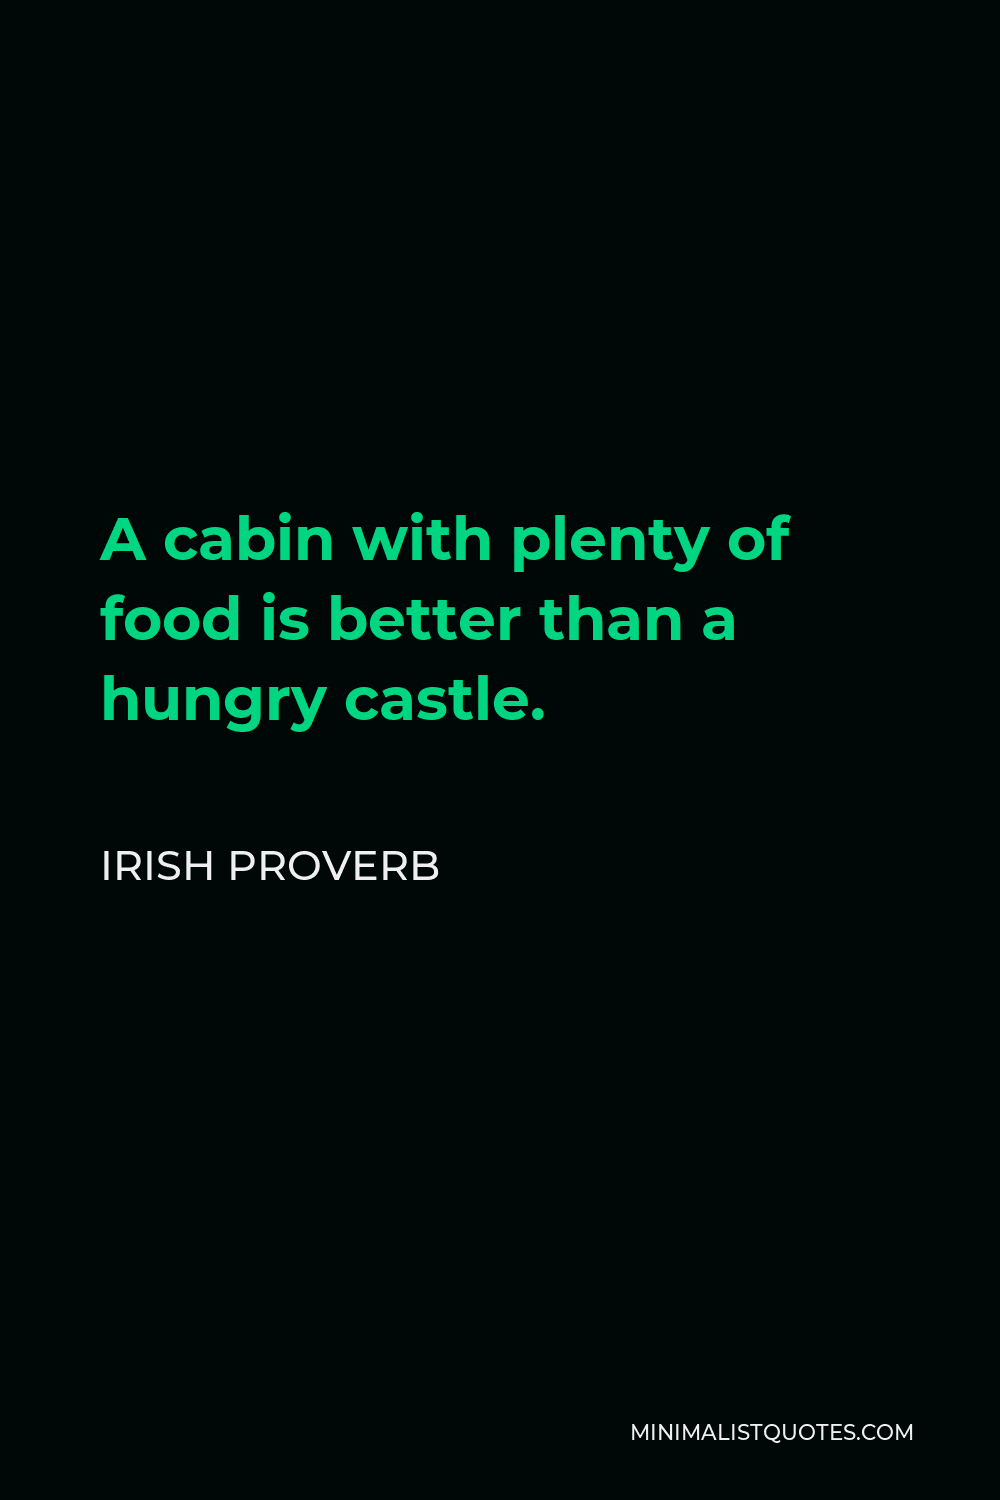 Irish Proverb Quote - A cabin with plenty of food is better than a hungry castle.